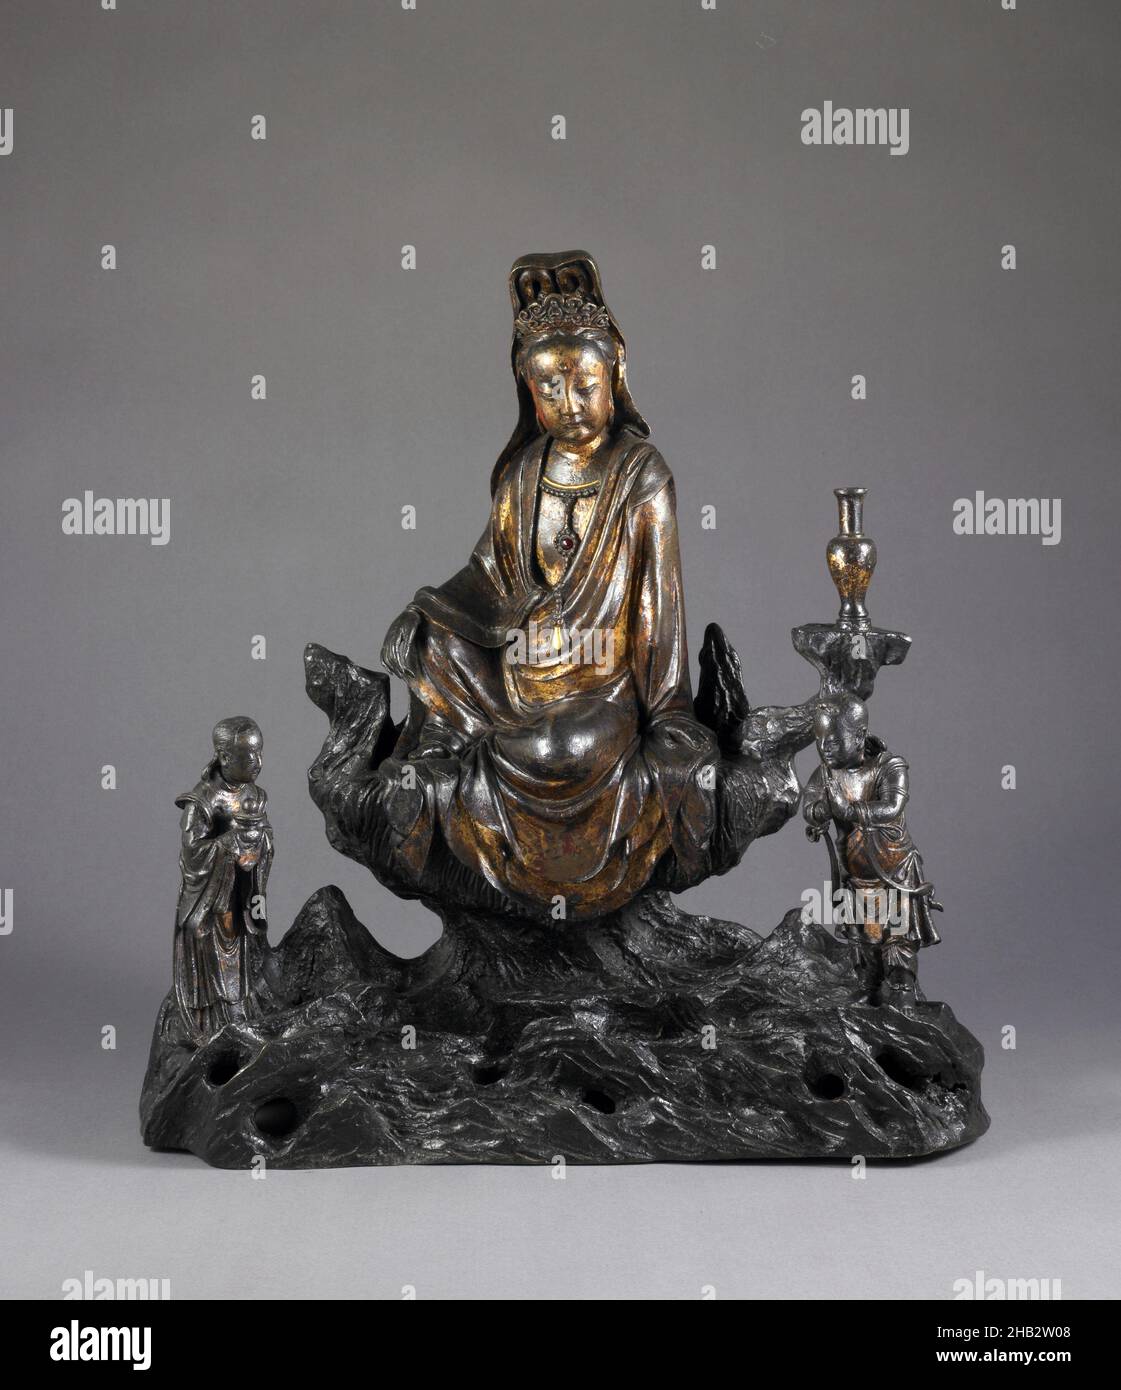 The Bodhisattva Avalokiteśvara with Acolytes Sudhanakumāra and Nāgakanyā at Mount Potalaka, Chinese, Ming dynasty, 1368–1644, Wanli period, 1573–1619, early 17th century, Bronze with jewel inlay and gilding, Made in China, Asia, Metalwork, sculpture, 17 x 16 7/8 x 9 in. (43.2 x 42.9 x 22.9 cm Stock Photo